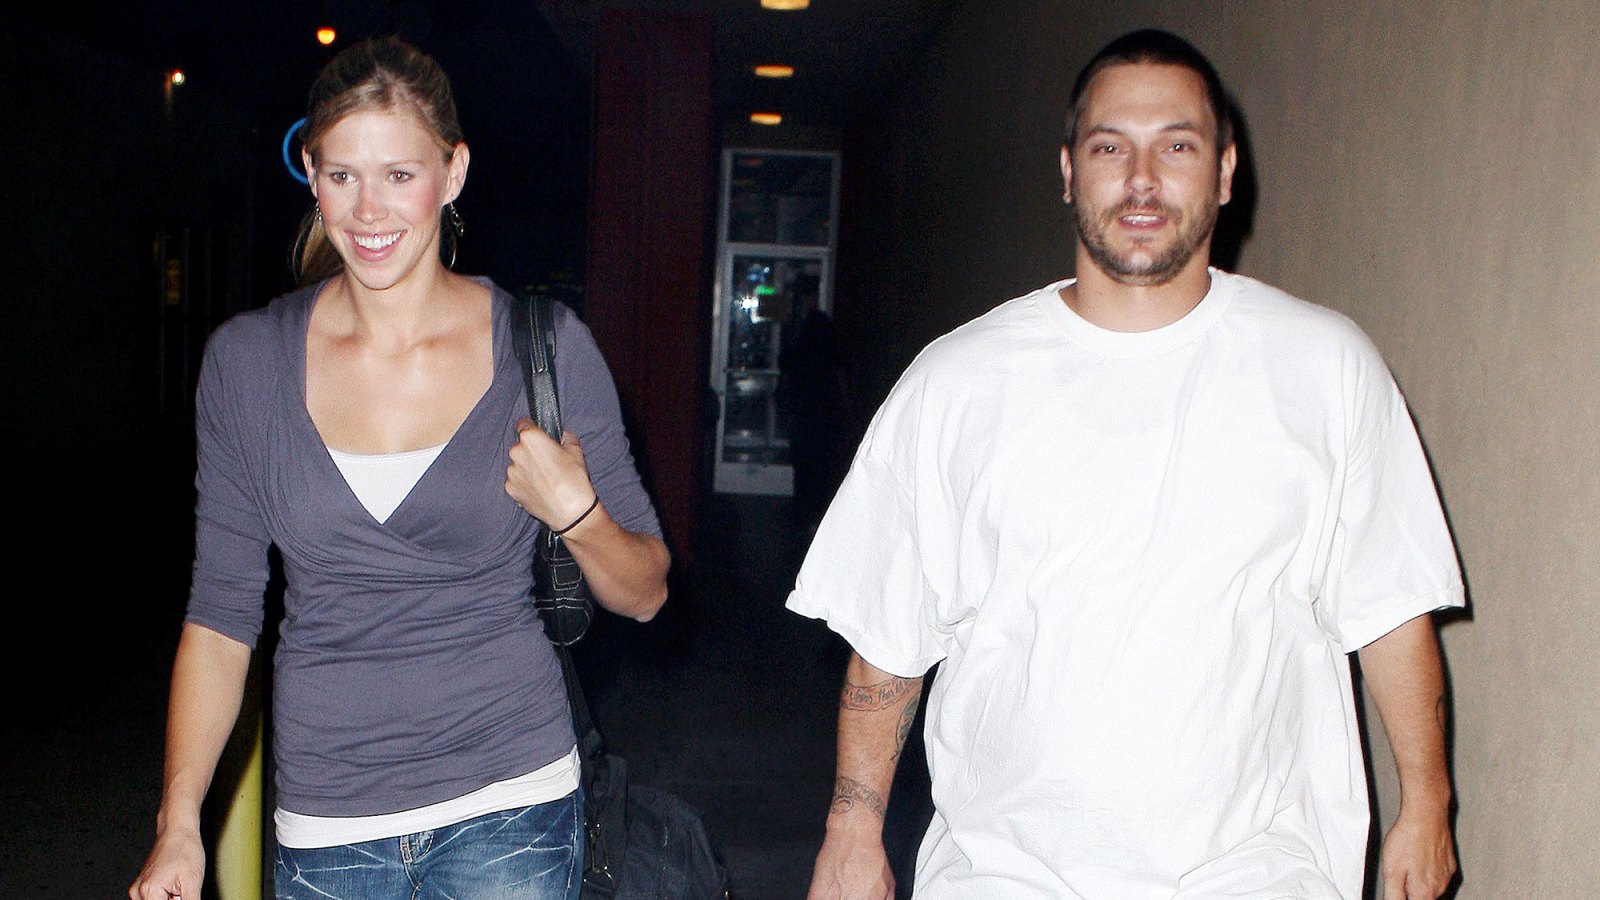 Kevin Federline’s Wife Victoria Prince Gives Birth to a Baby Girl